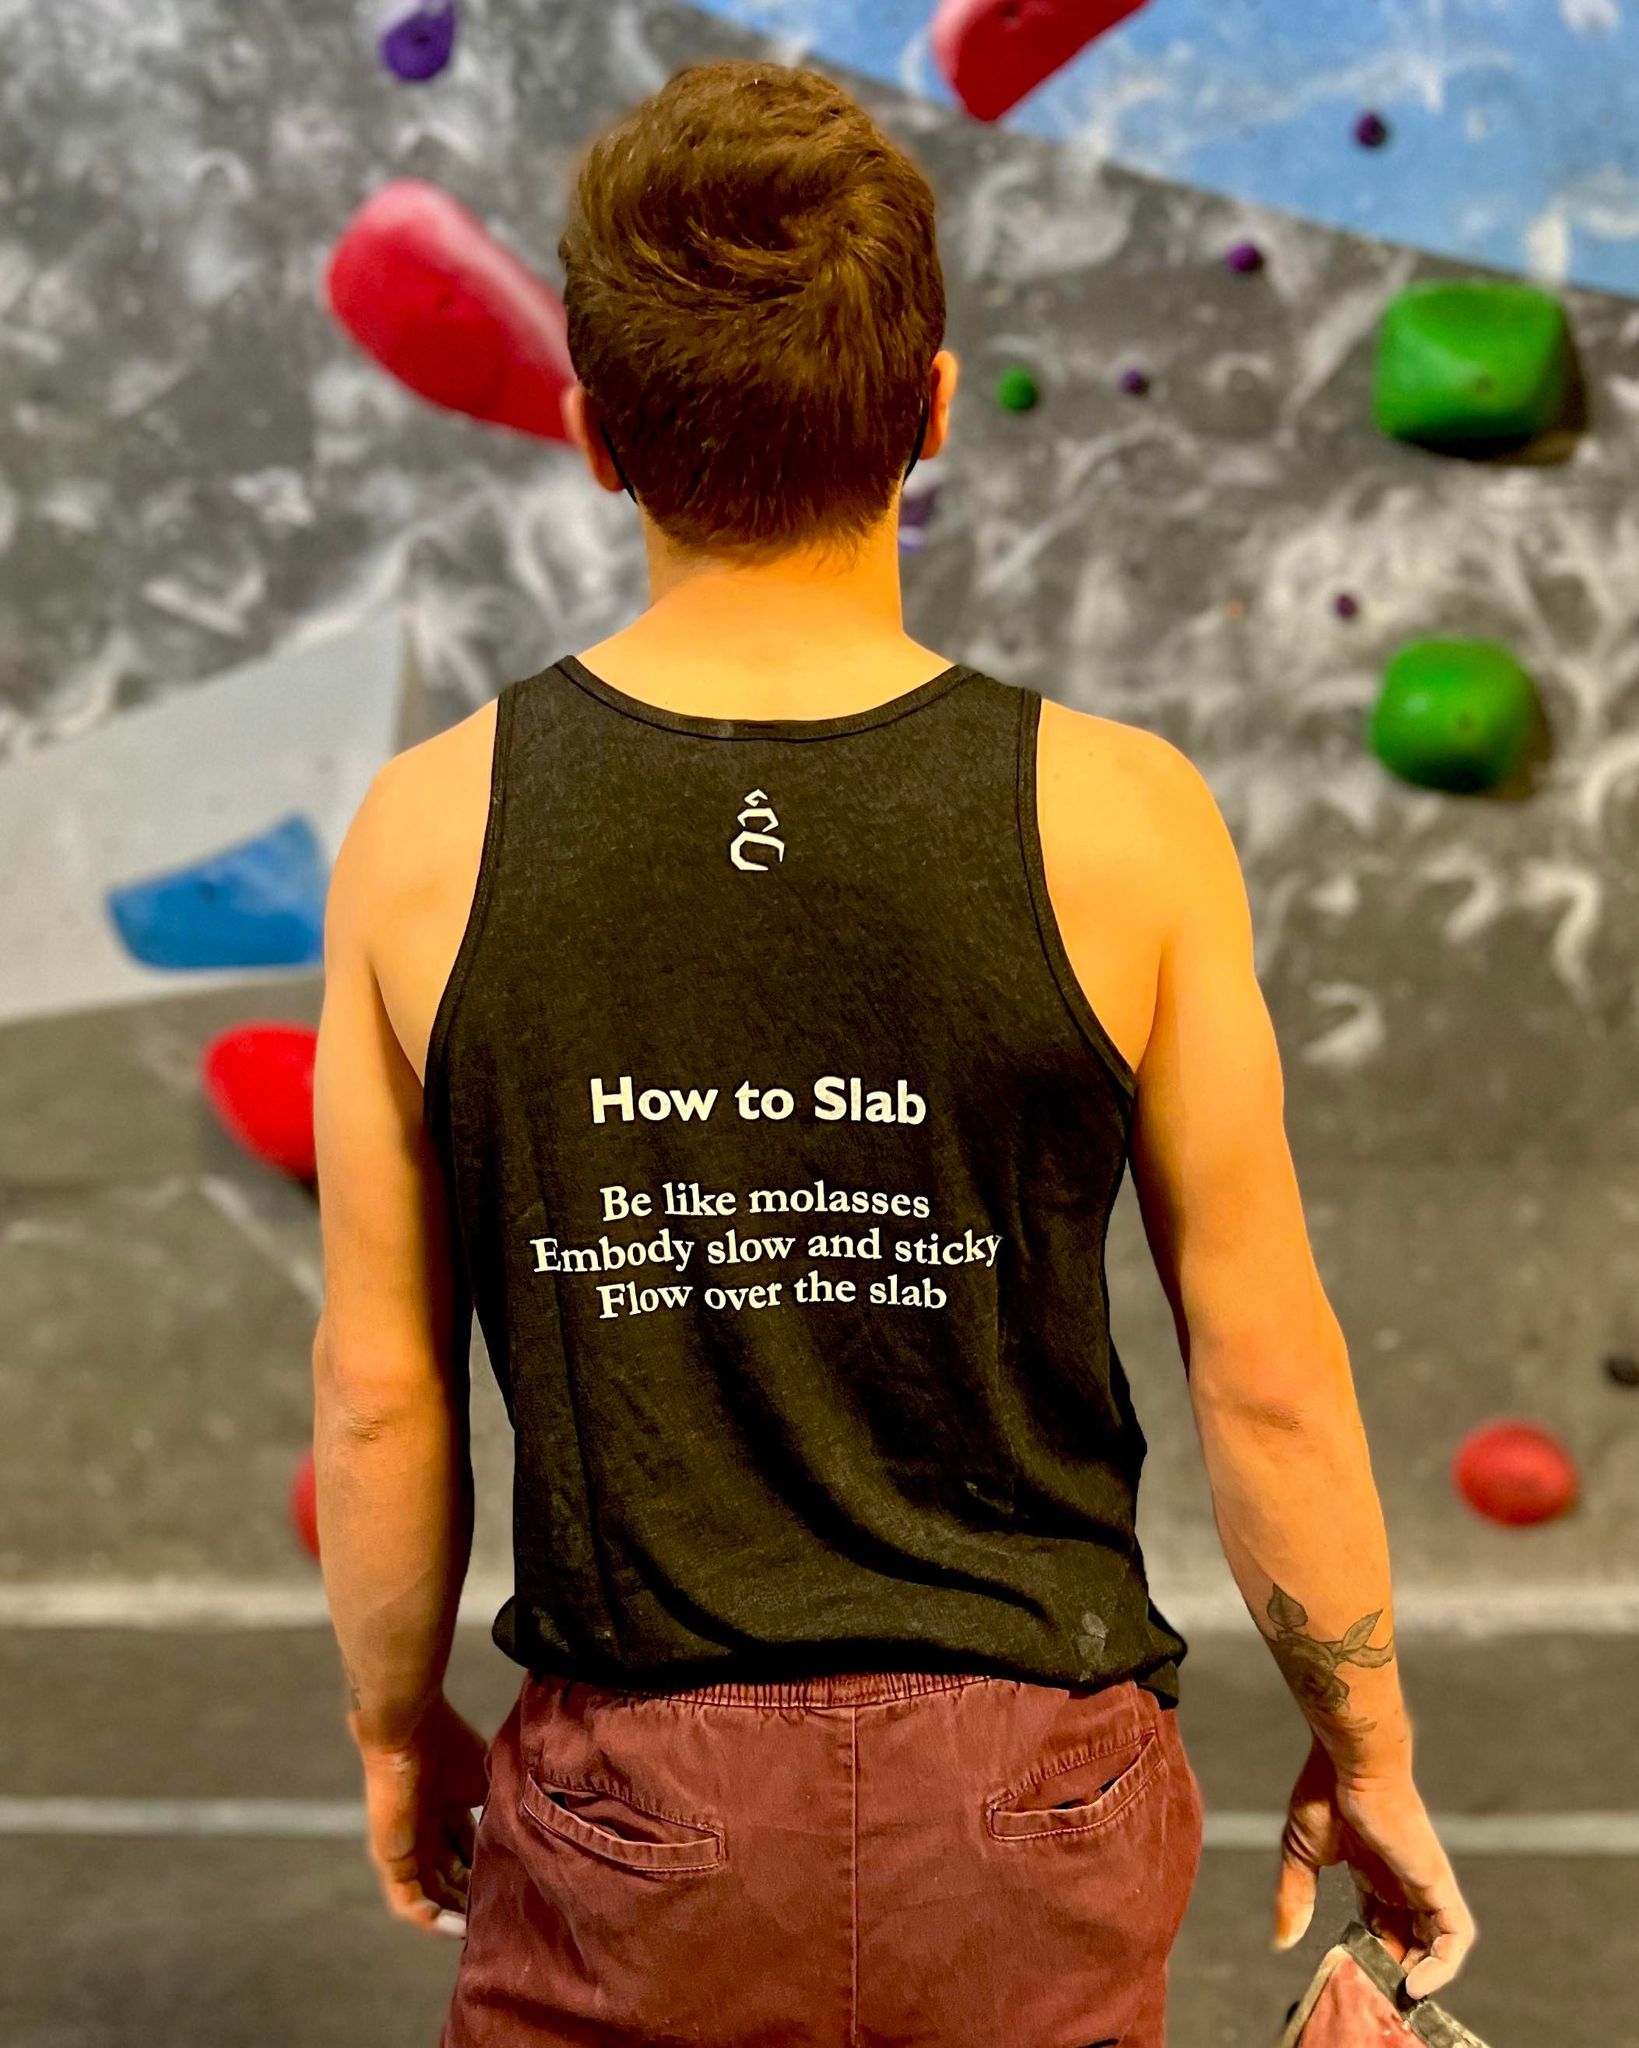 Charcoal black tank top shirt with How to Slab haiku on the back worn by male looking at climbing wall in the gym